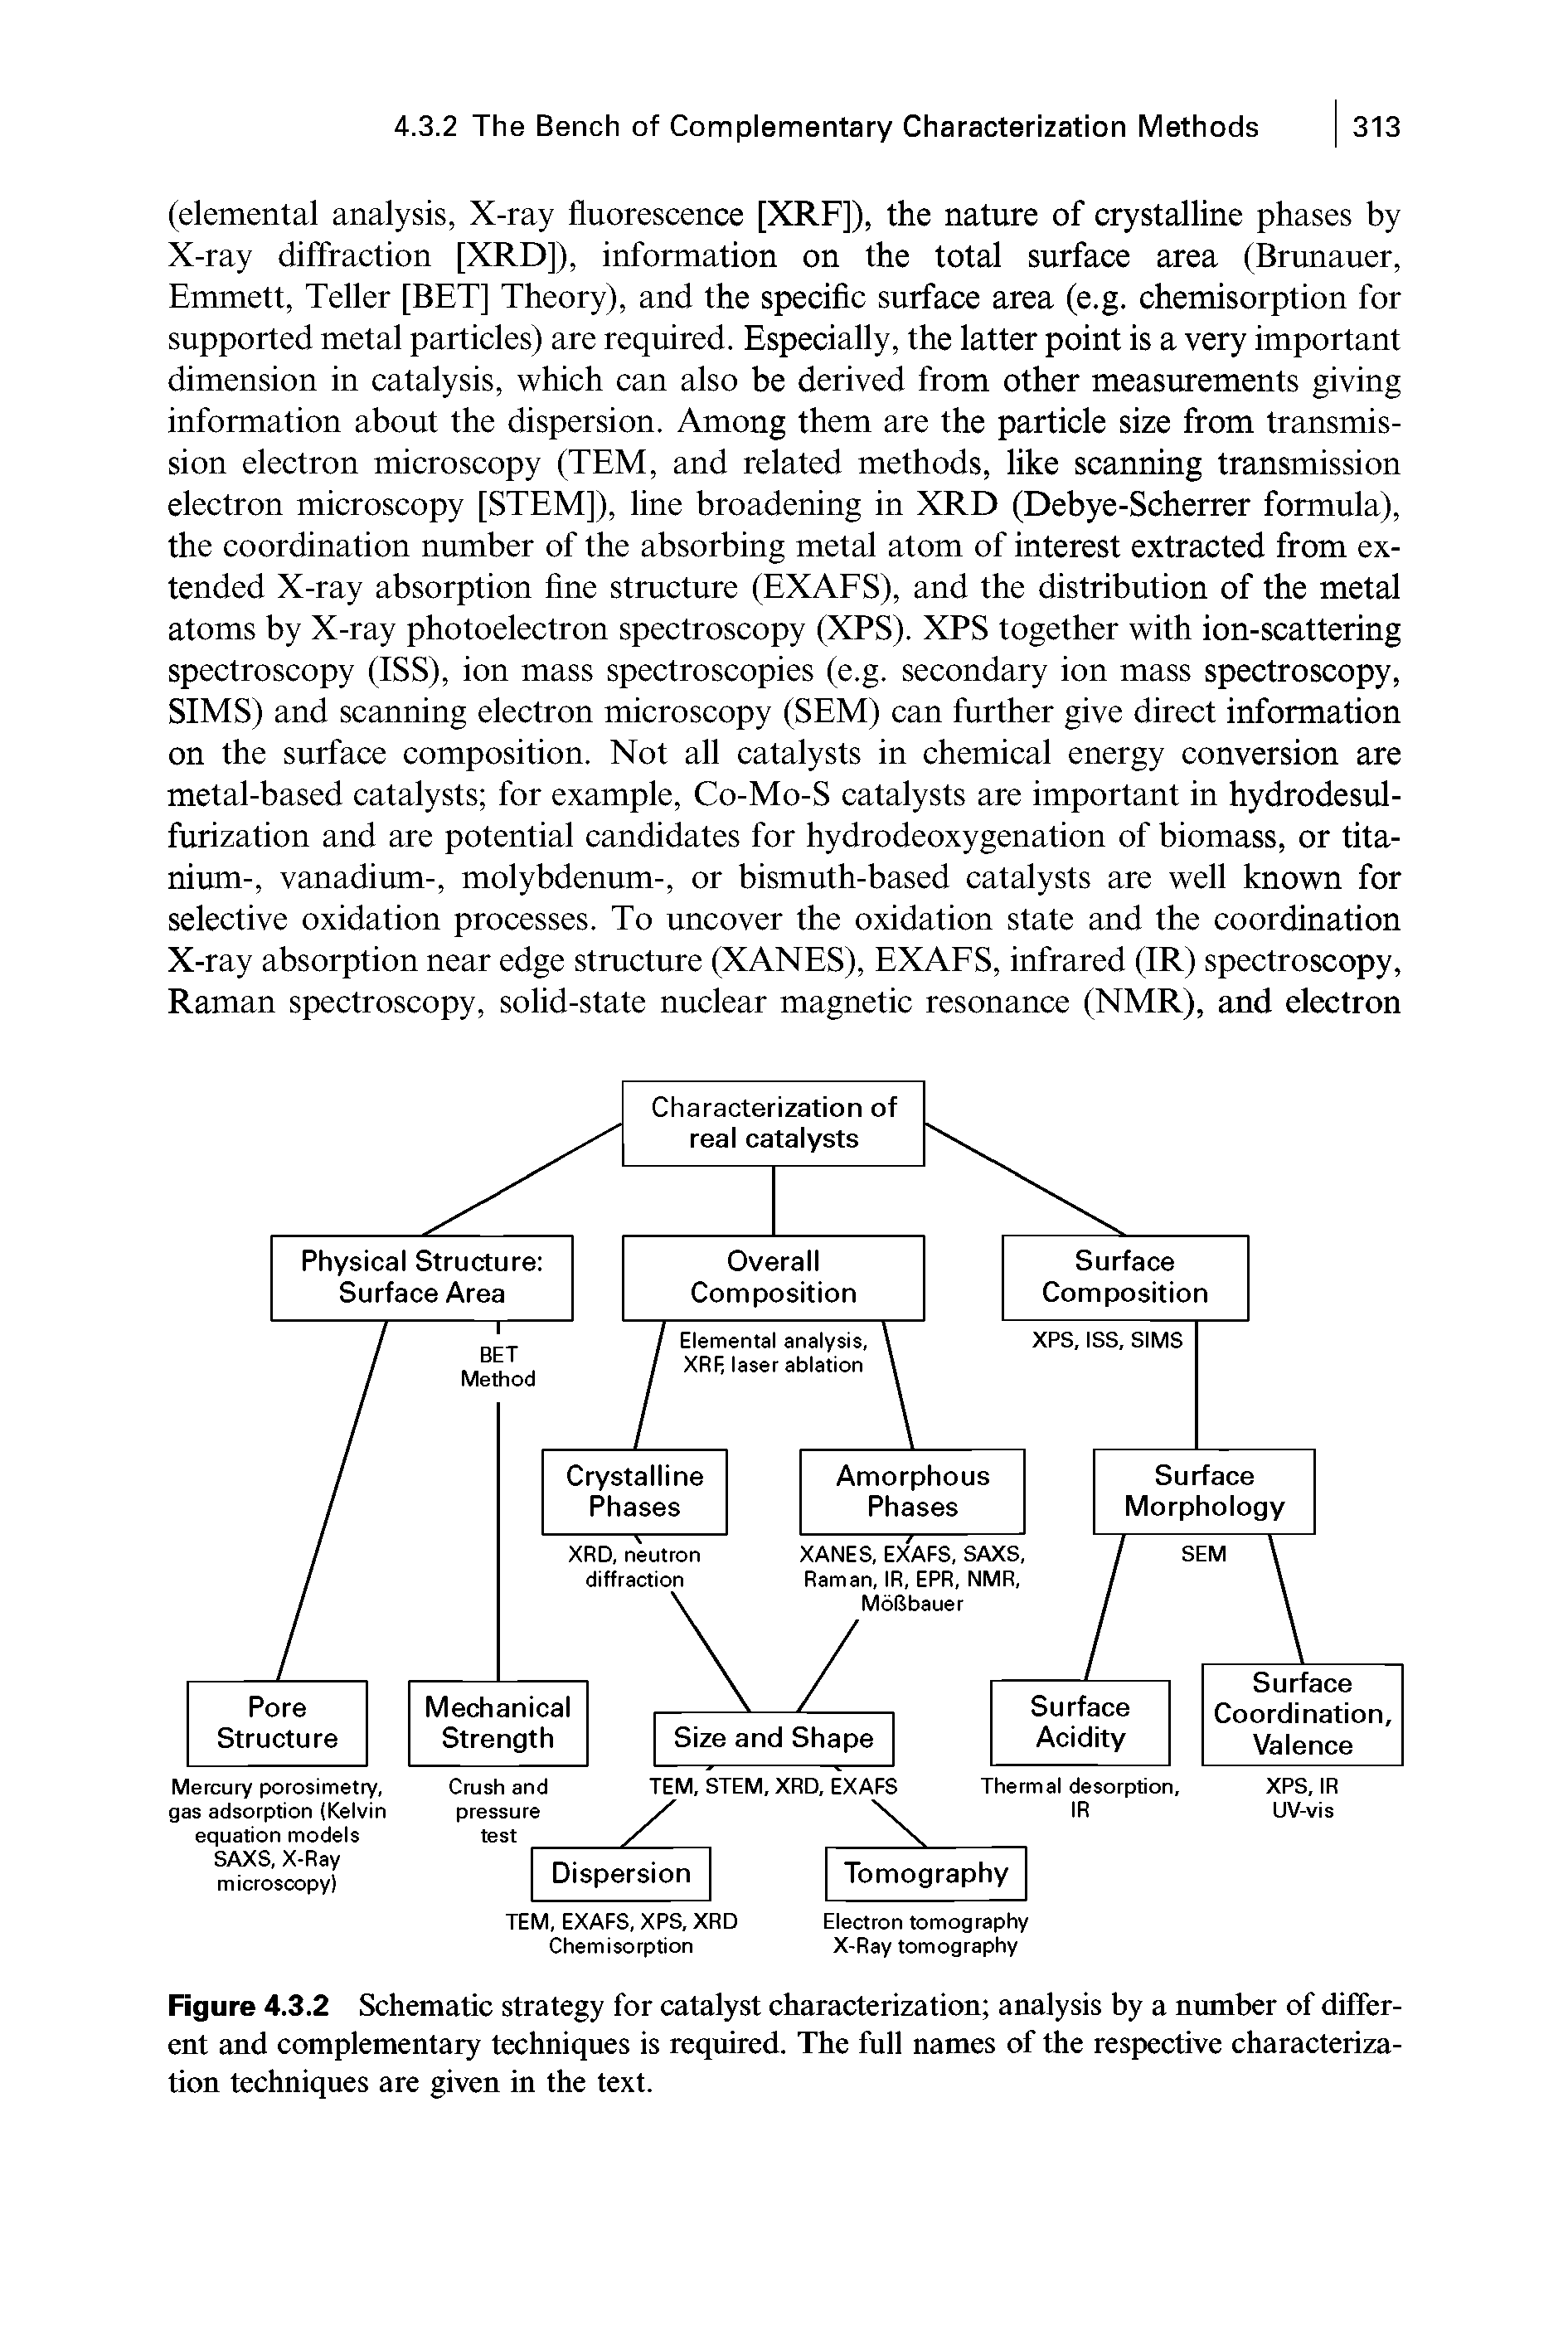 Figure 4.3.2 Schematic strategy for catalyst characterization analysis by a number of different and complementary techniques is required. The full names of the respective characterization techniques are given in the text.